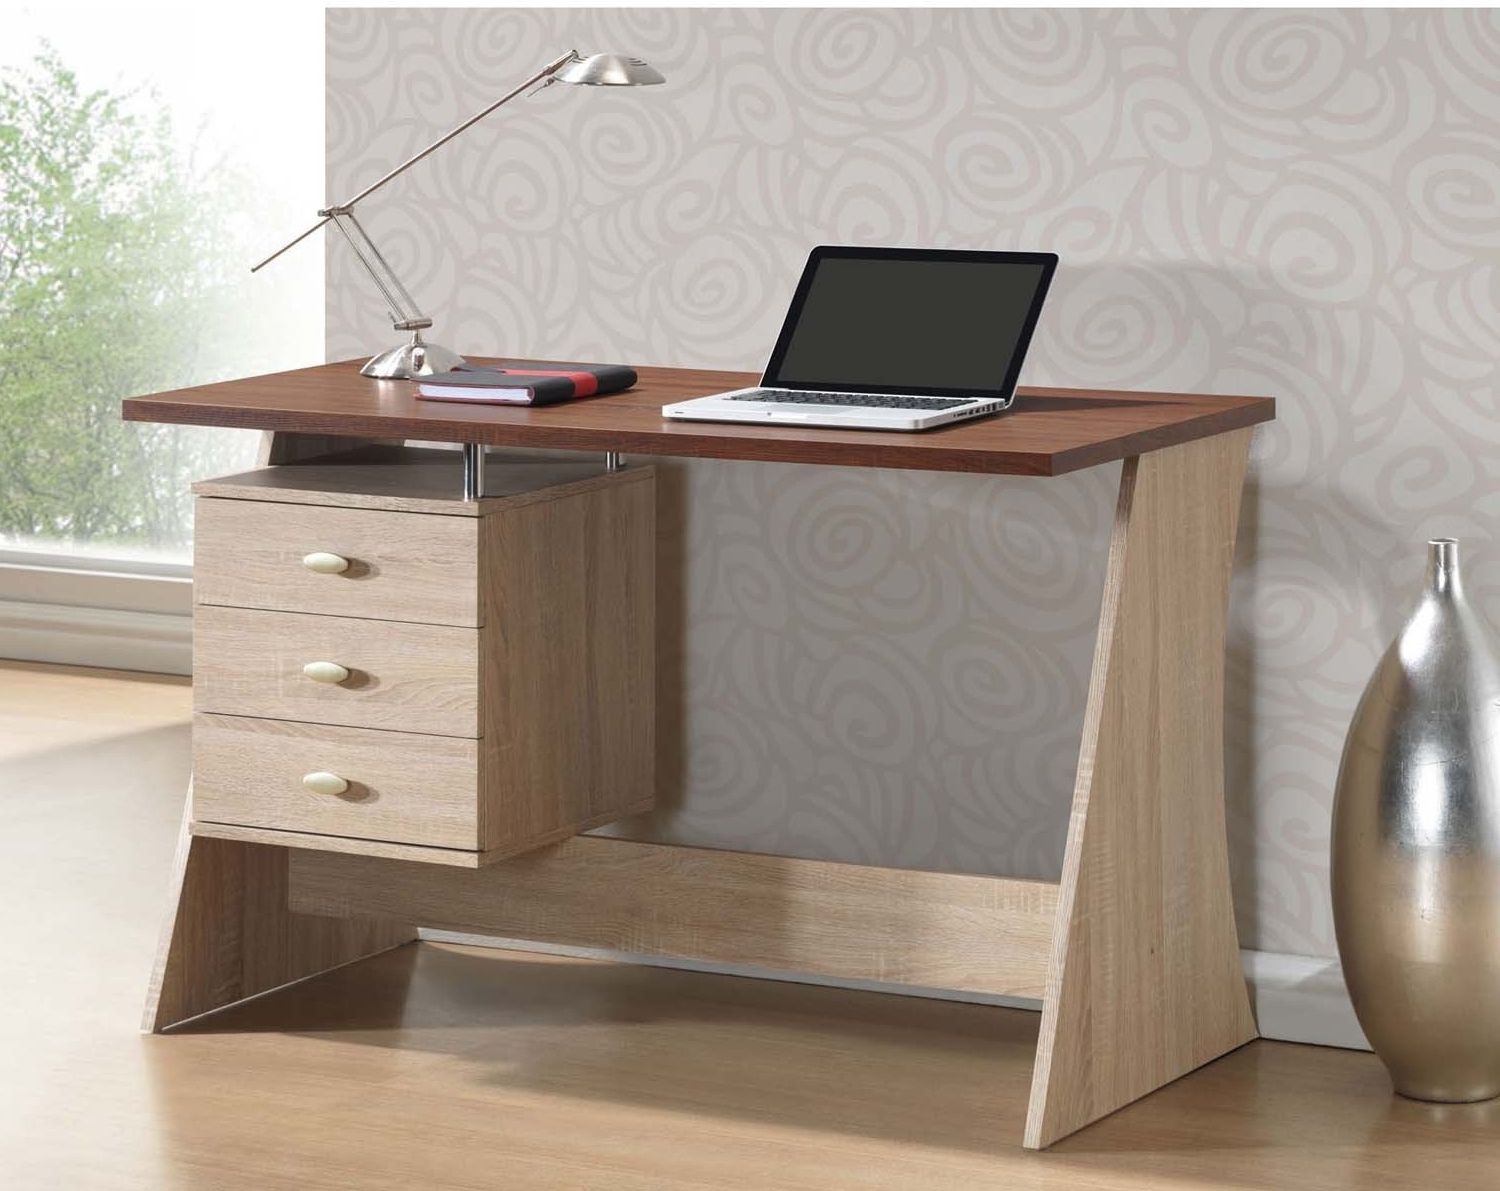 20+ Contemporary Office Desk Designs, Decorating Ideas (View 12 of 15)